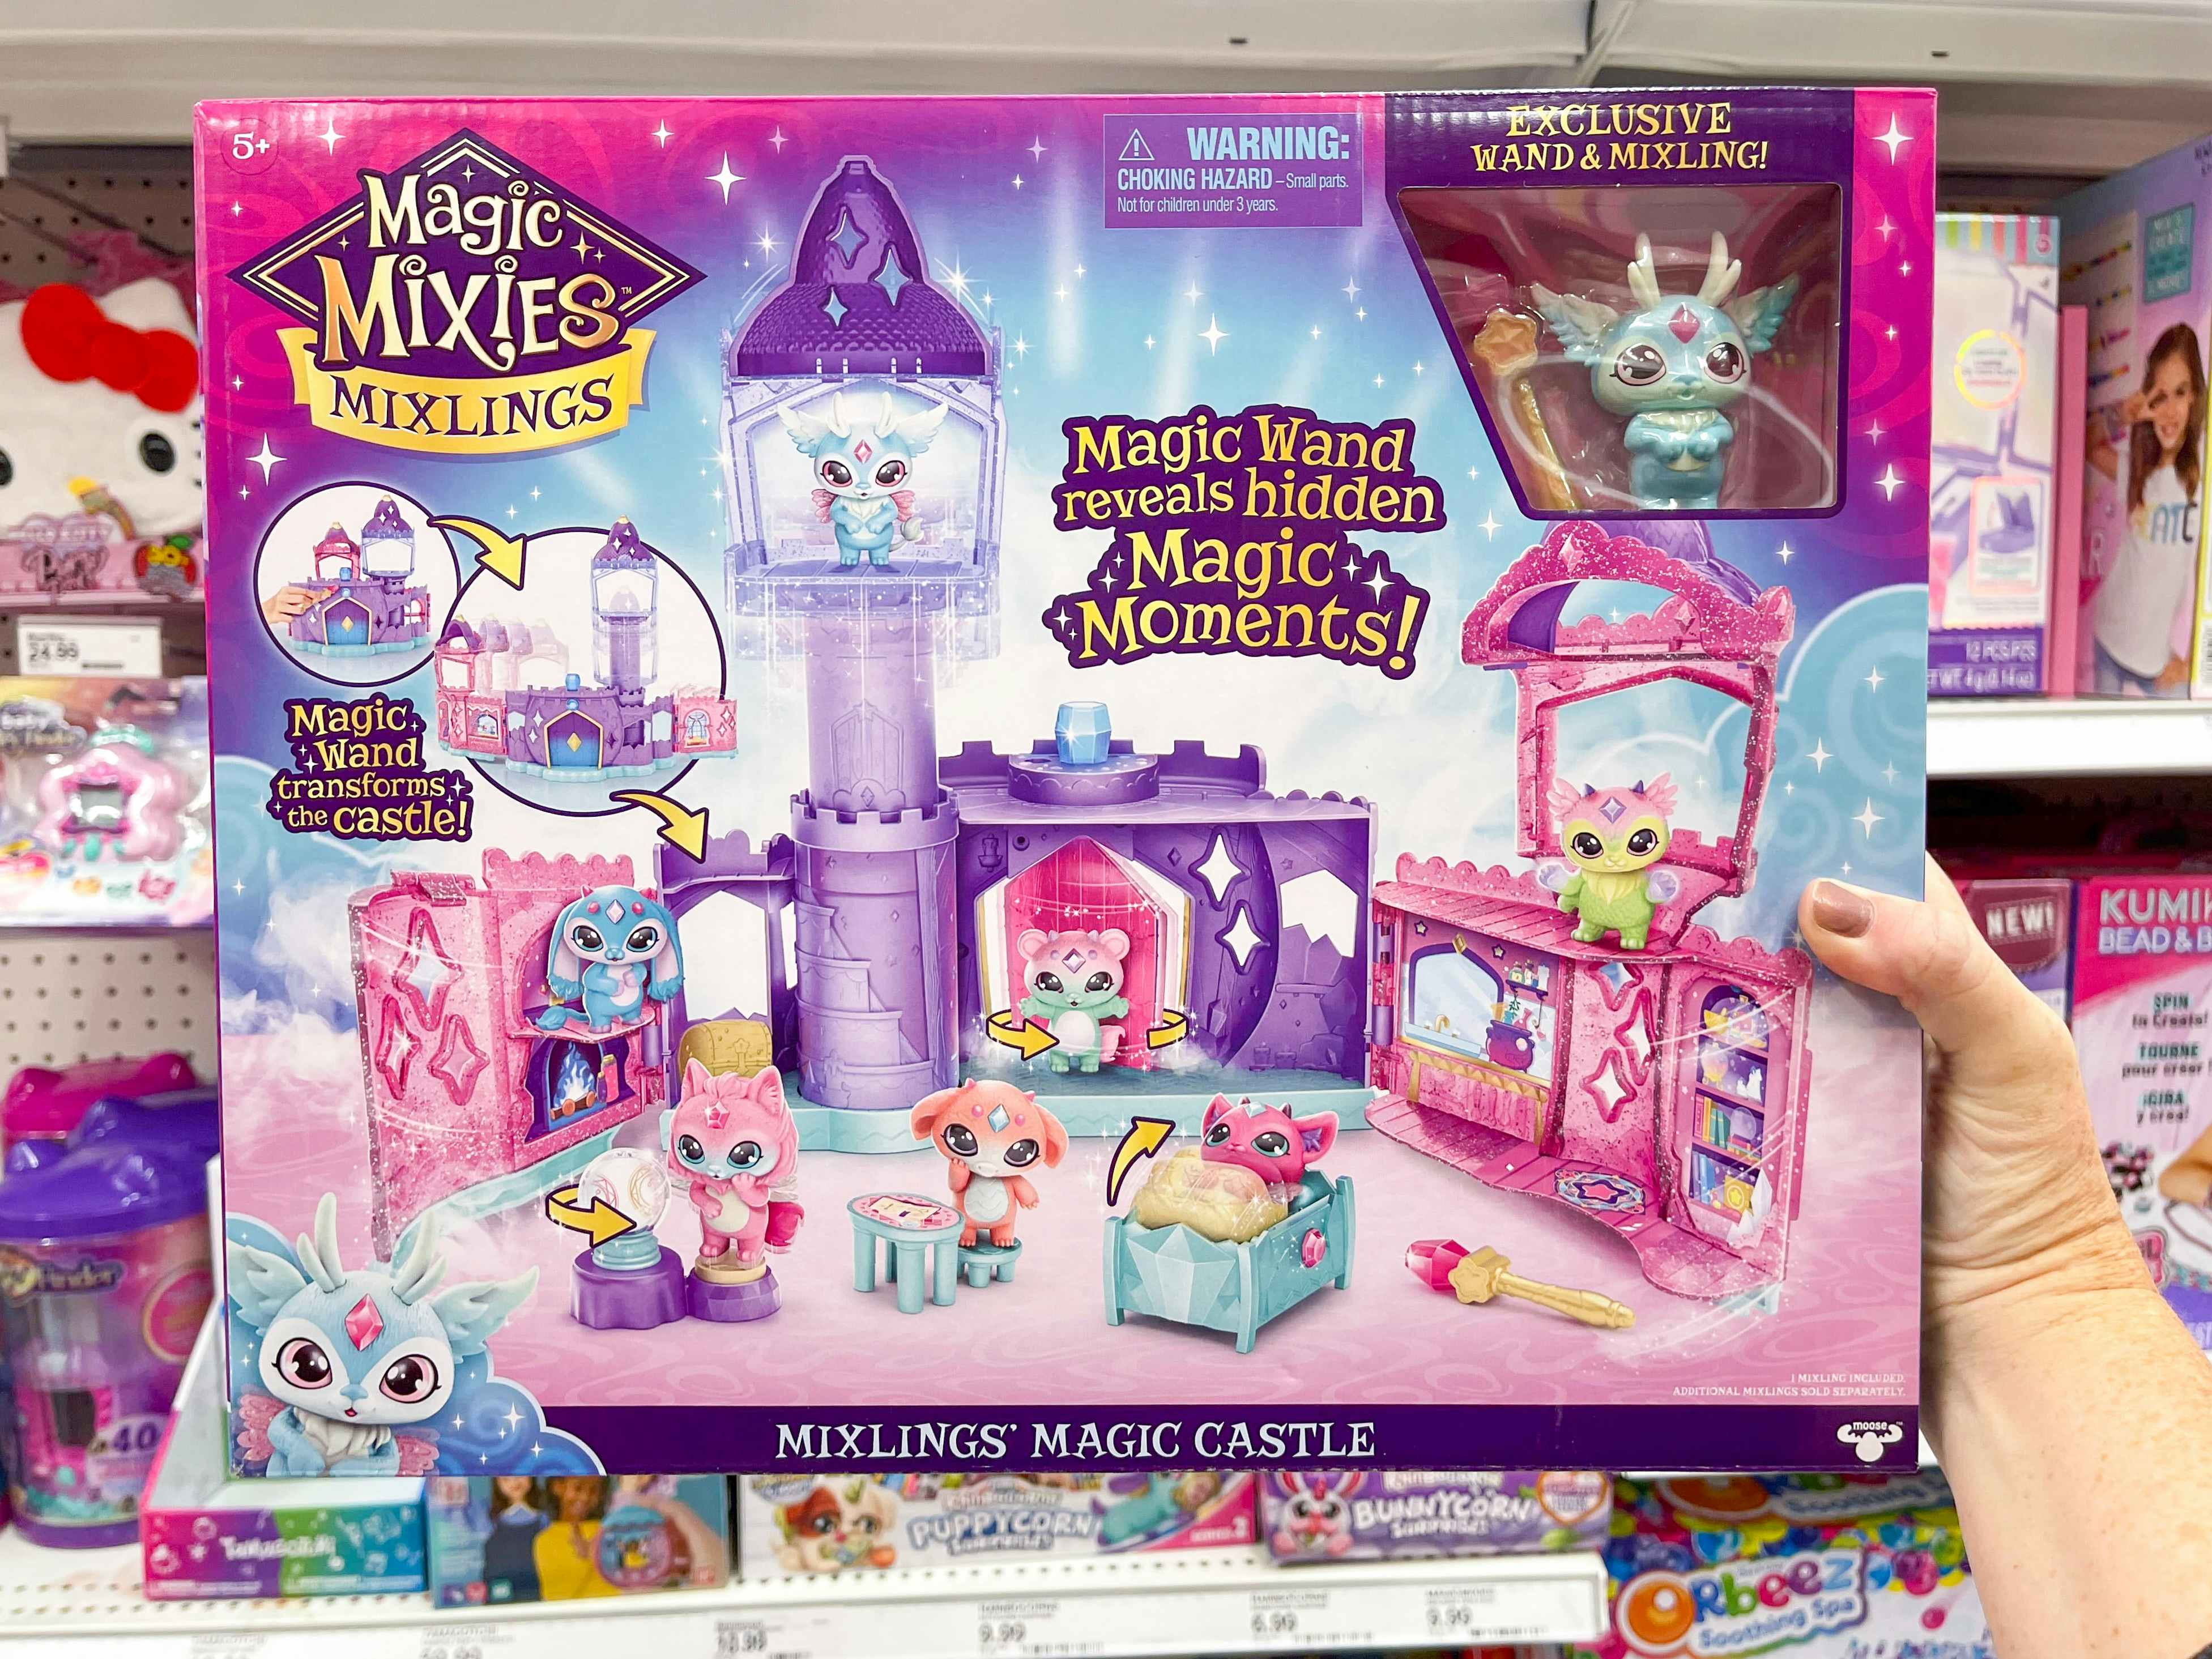 A person holding up a Magic Mixies Mixlings Castle Playset in Target.